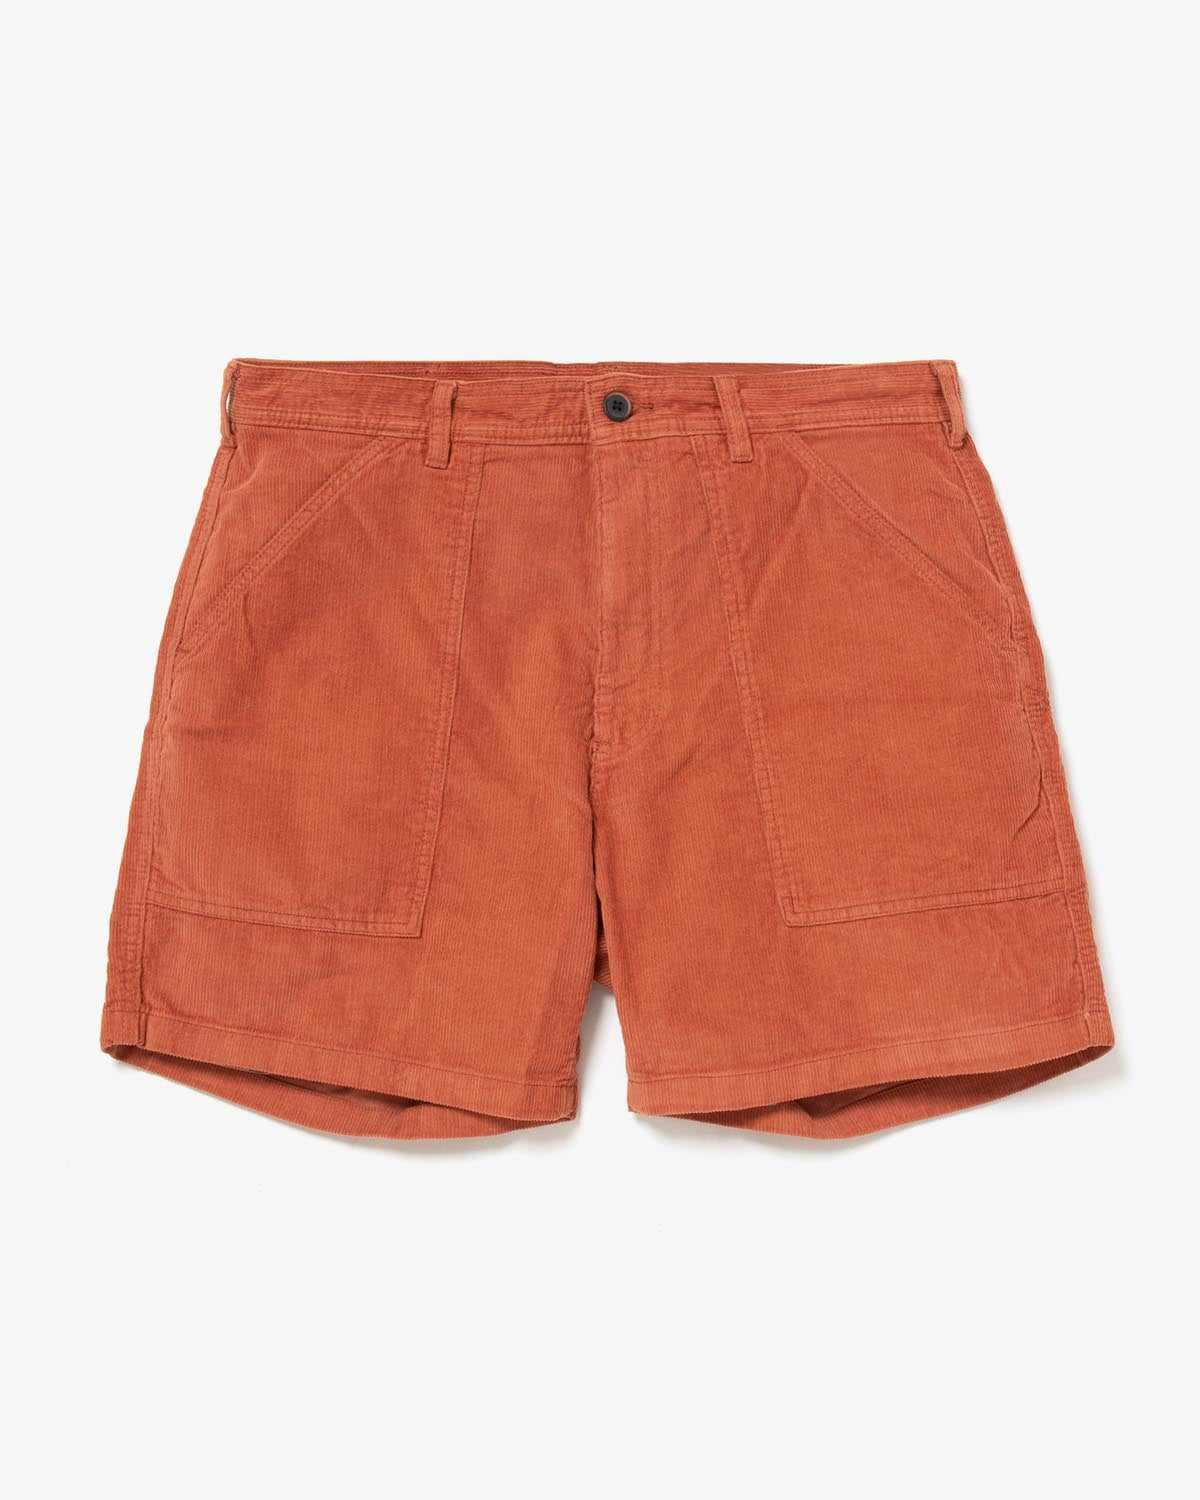 M'S ORGANIC COTTON CORD UTILITY SHORTS - 6 IN.